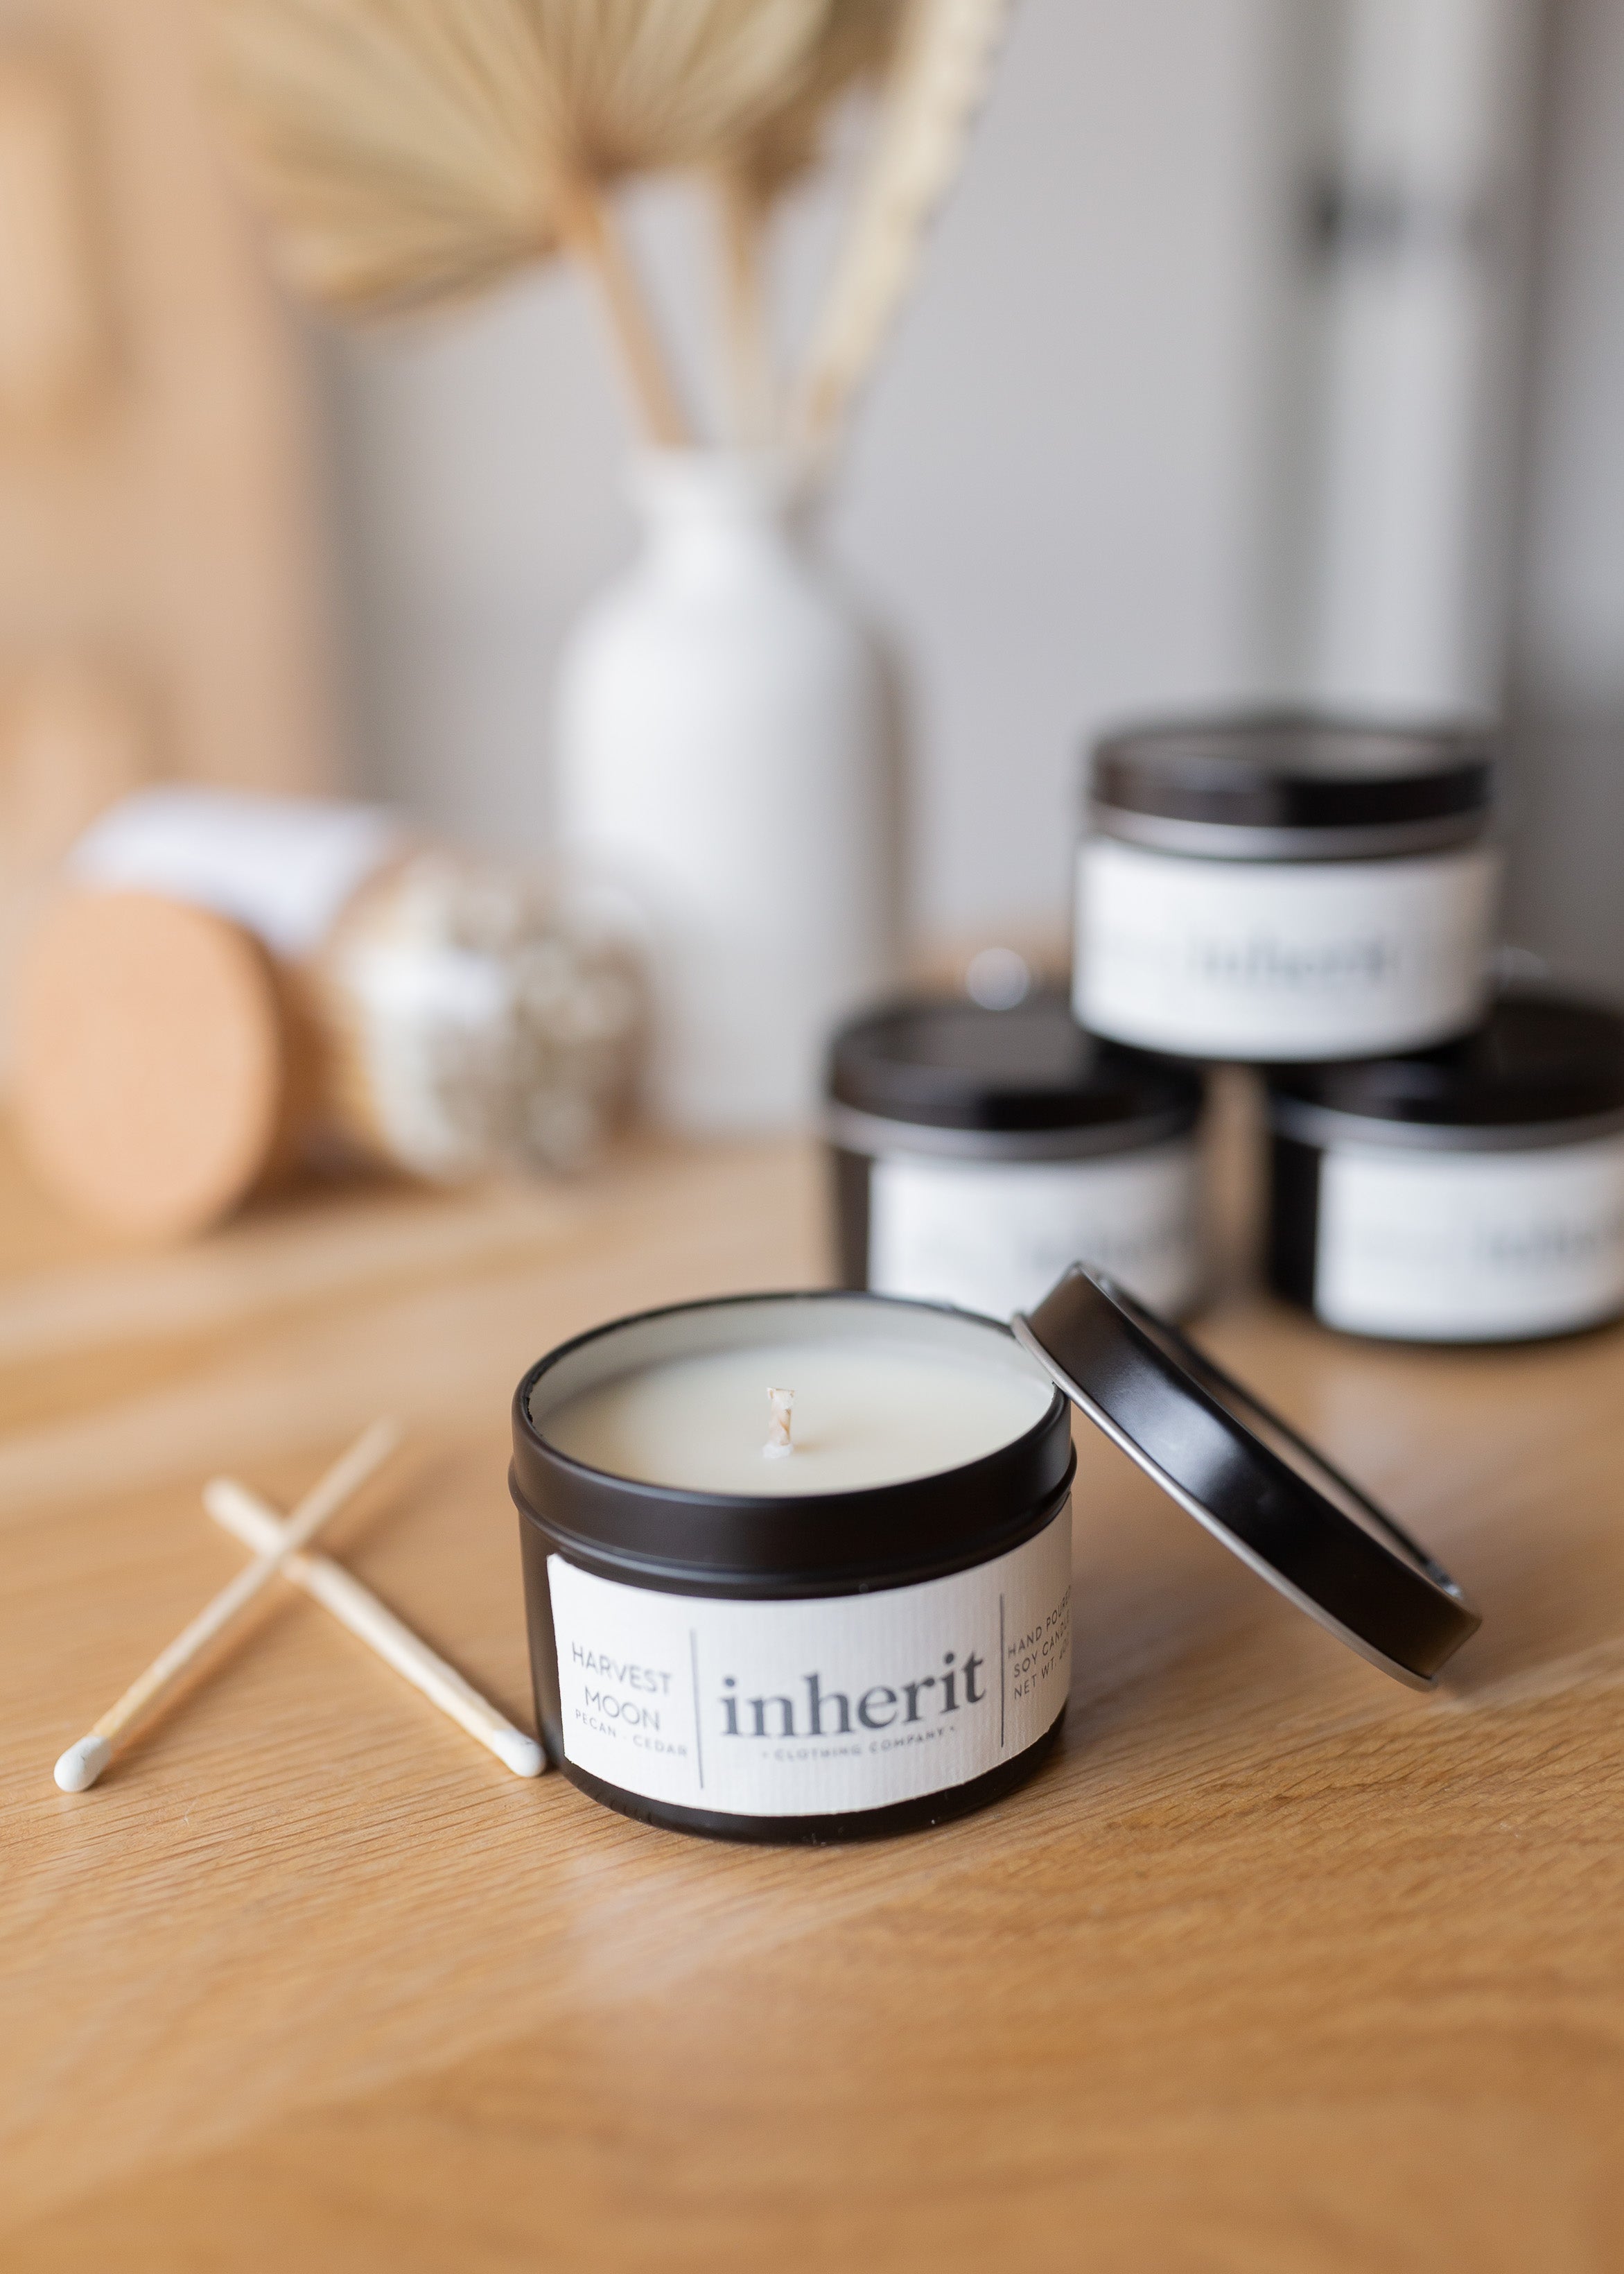 Image of DOORBUSTER - Inherit Fall Scented Soy Candle 4 oz. - FINAL SALE